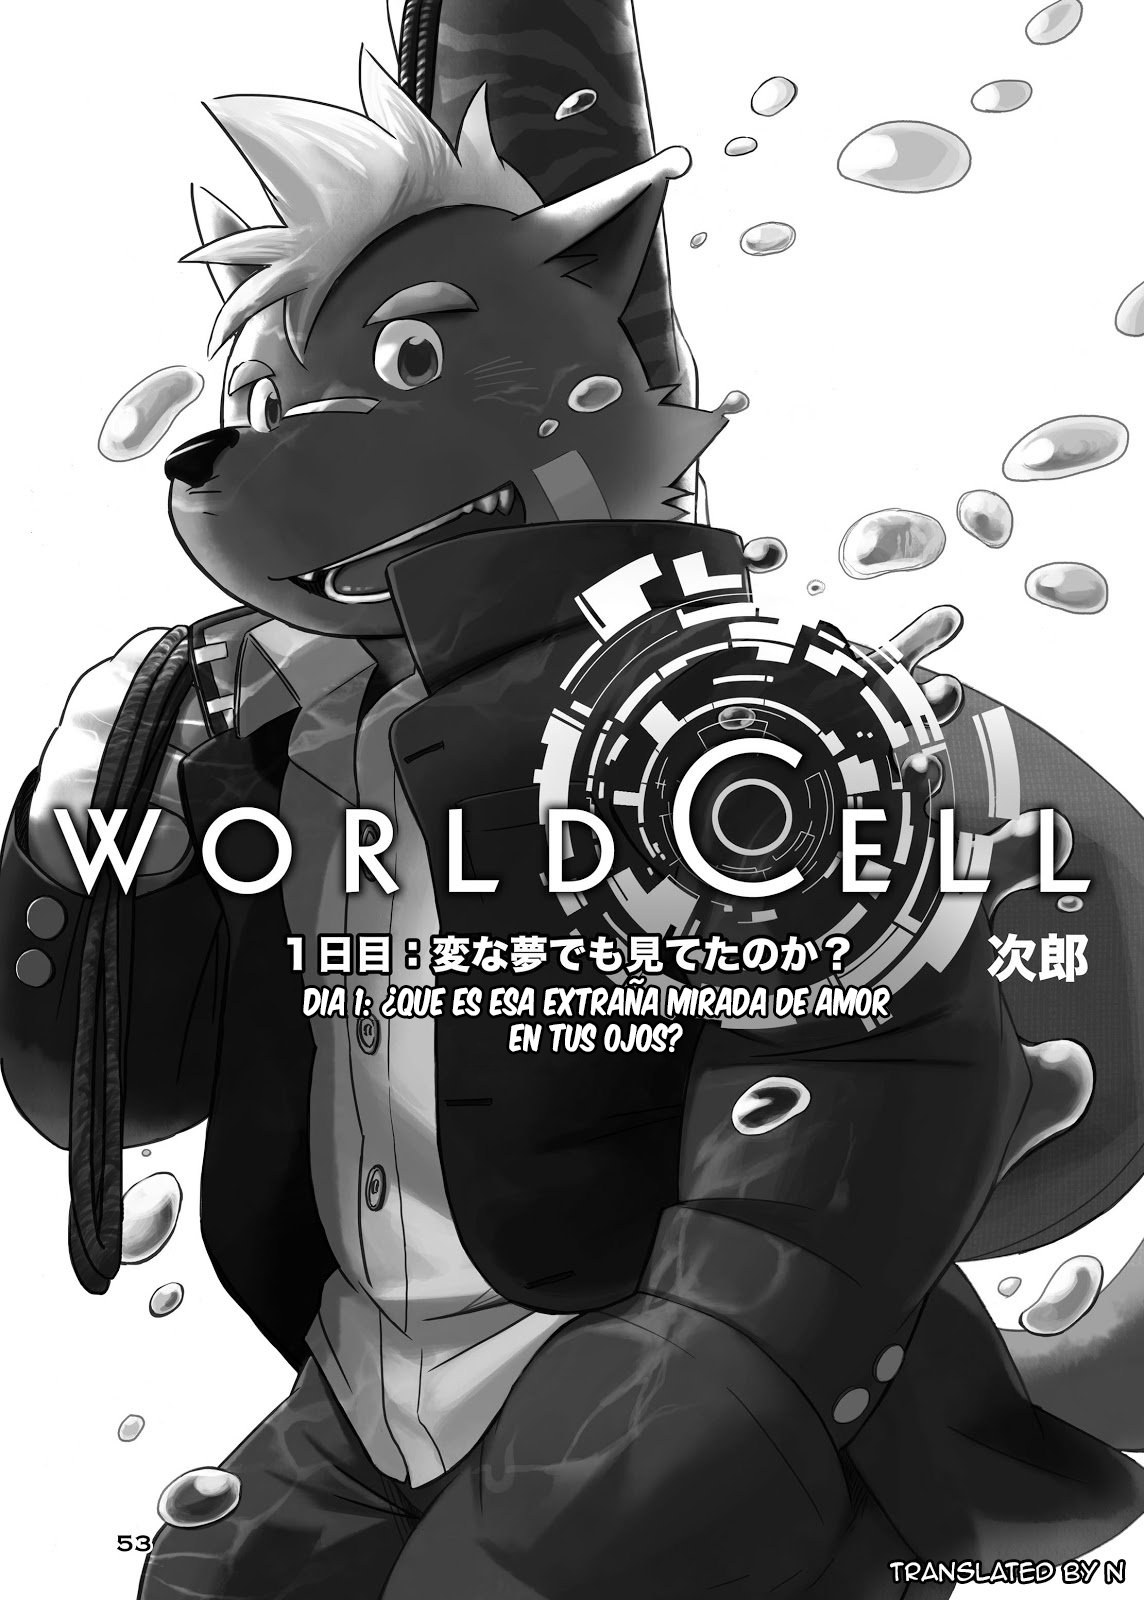 (Fur-st 3) [FCLG (Jiroh)] World Cell | World Cell - Día 1 (COWPER! vol.RED) [Spanish] [Surthan] (ふぁーすと3) [フクラグ (次郎)] WORLD CELL (カウパー! vol.RED) [スペイン翻訳]